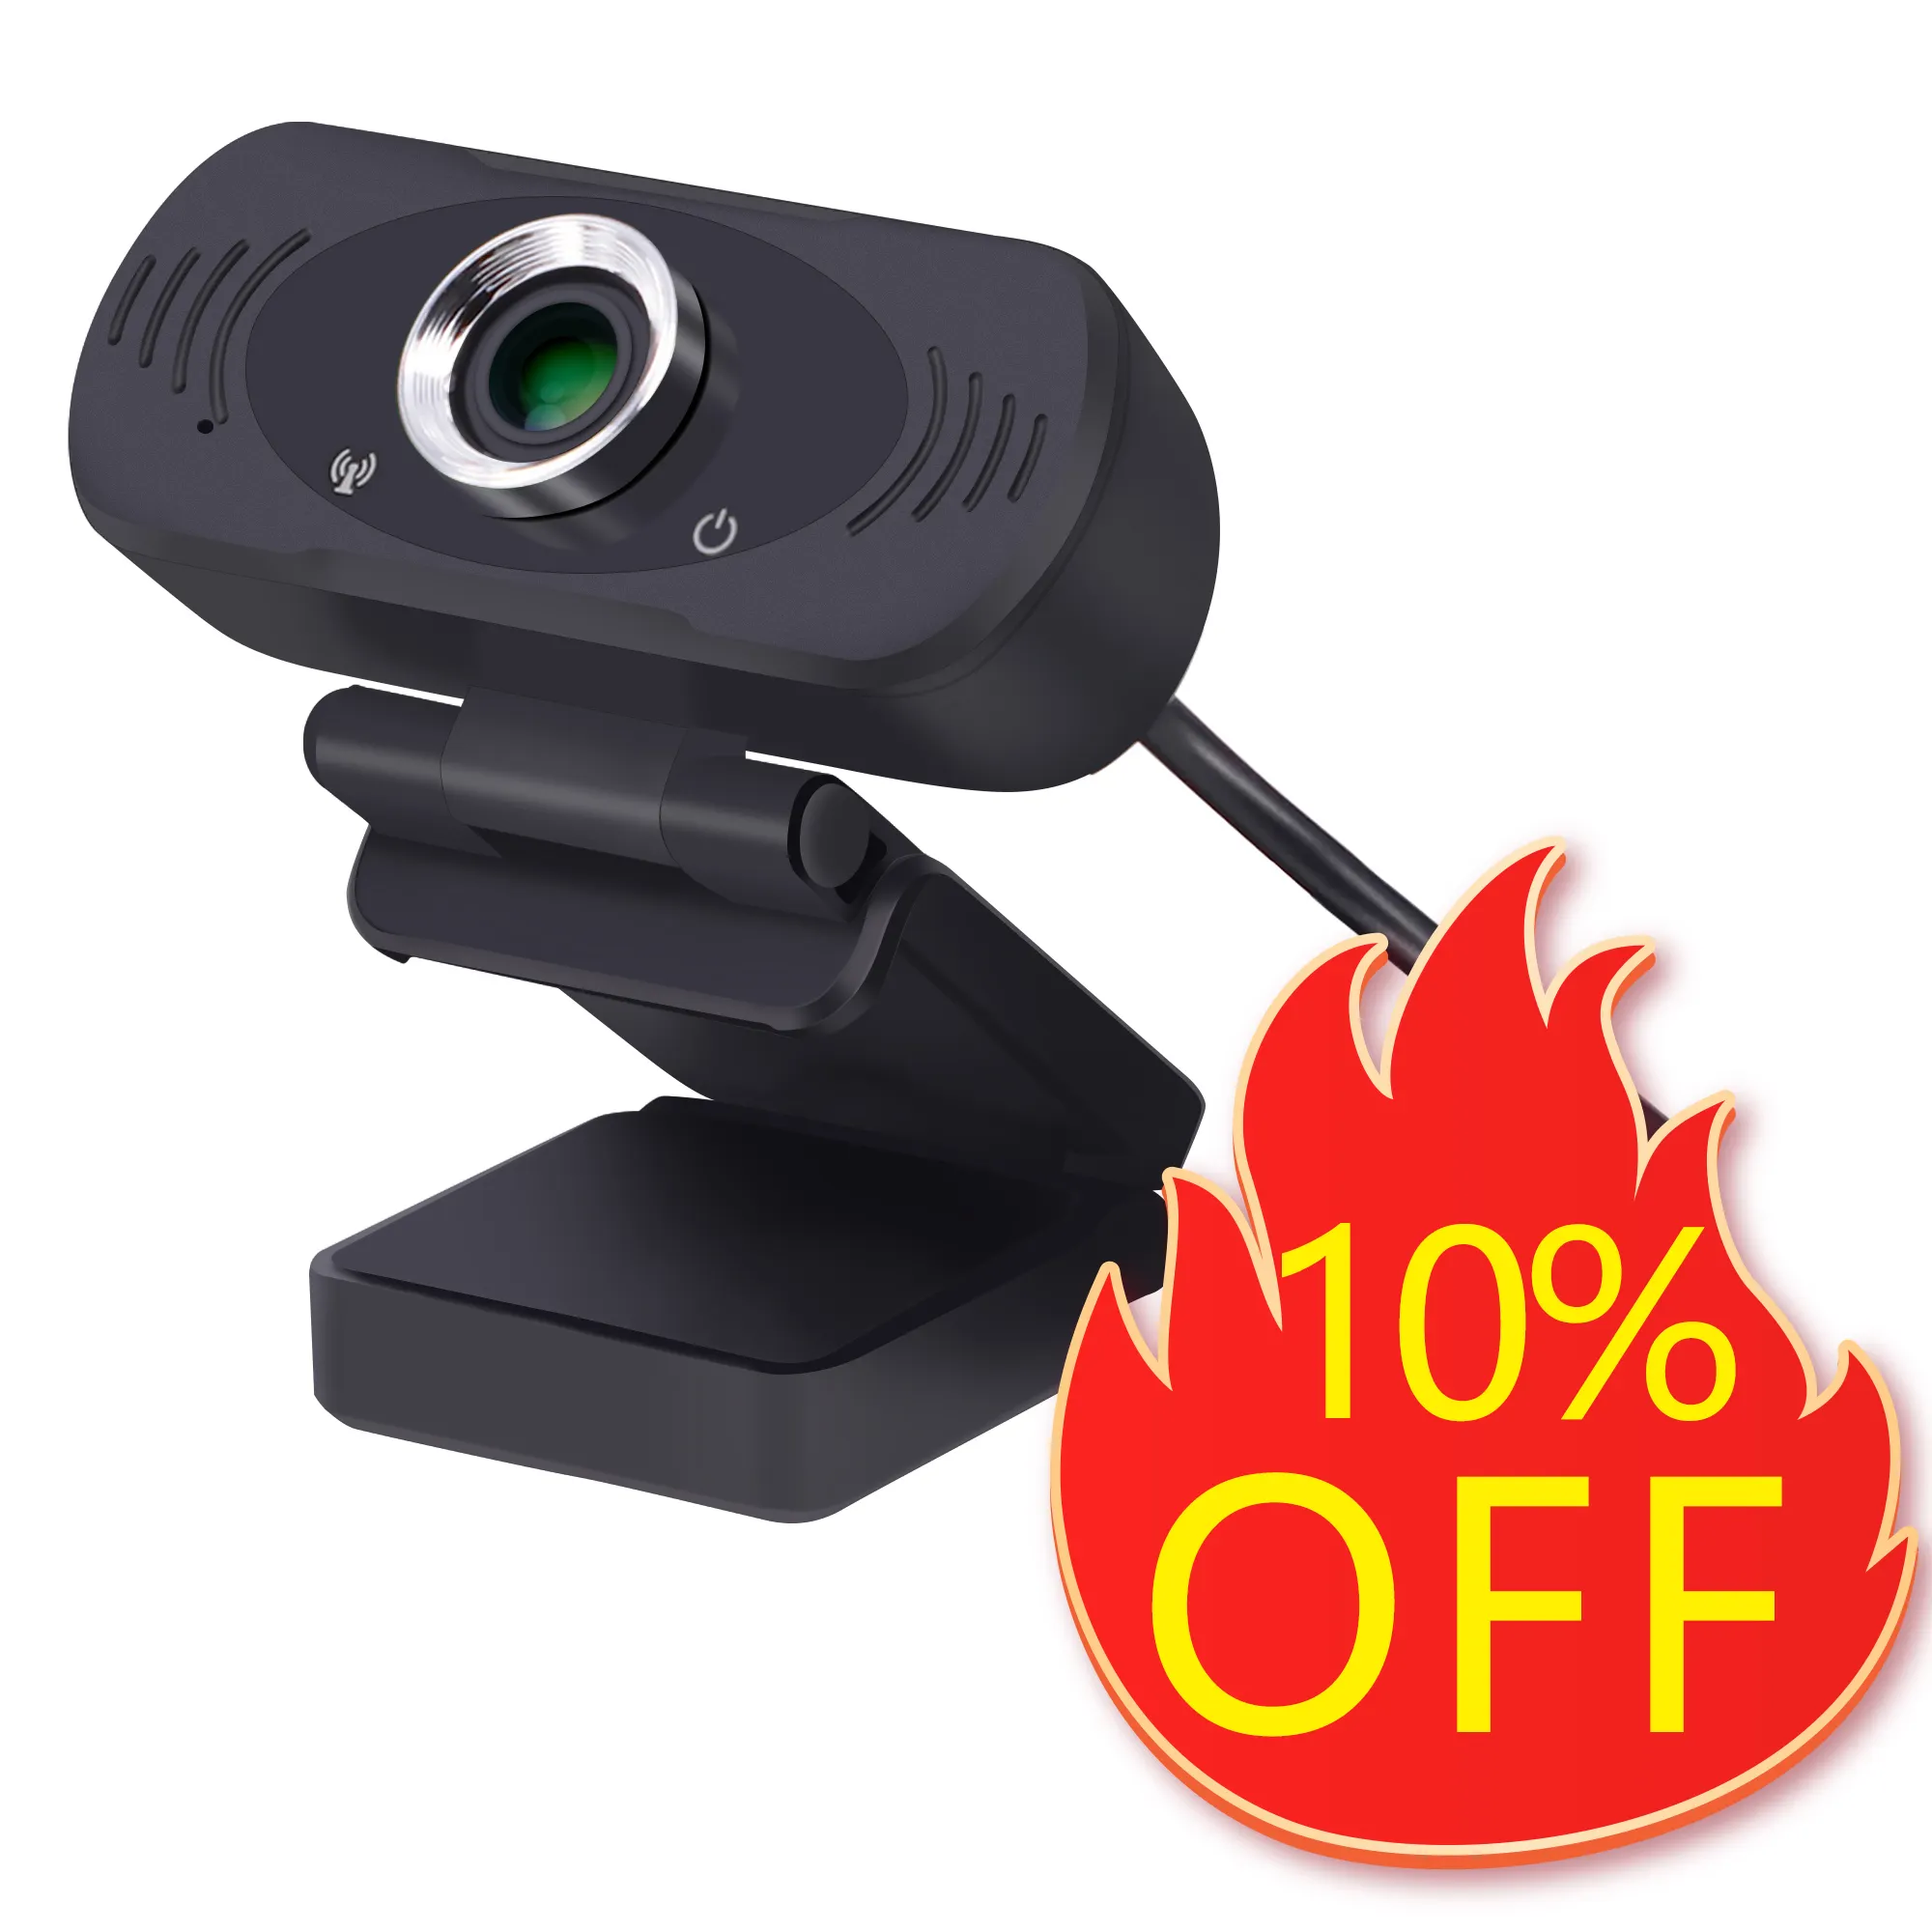 Full HD 1080P USB Computer Webcam Web Camera With Microphone Tripod And Privacy Shutter